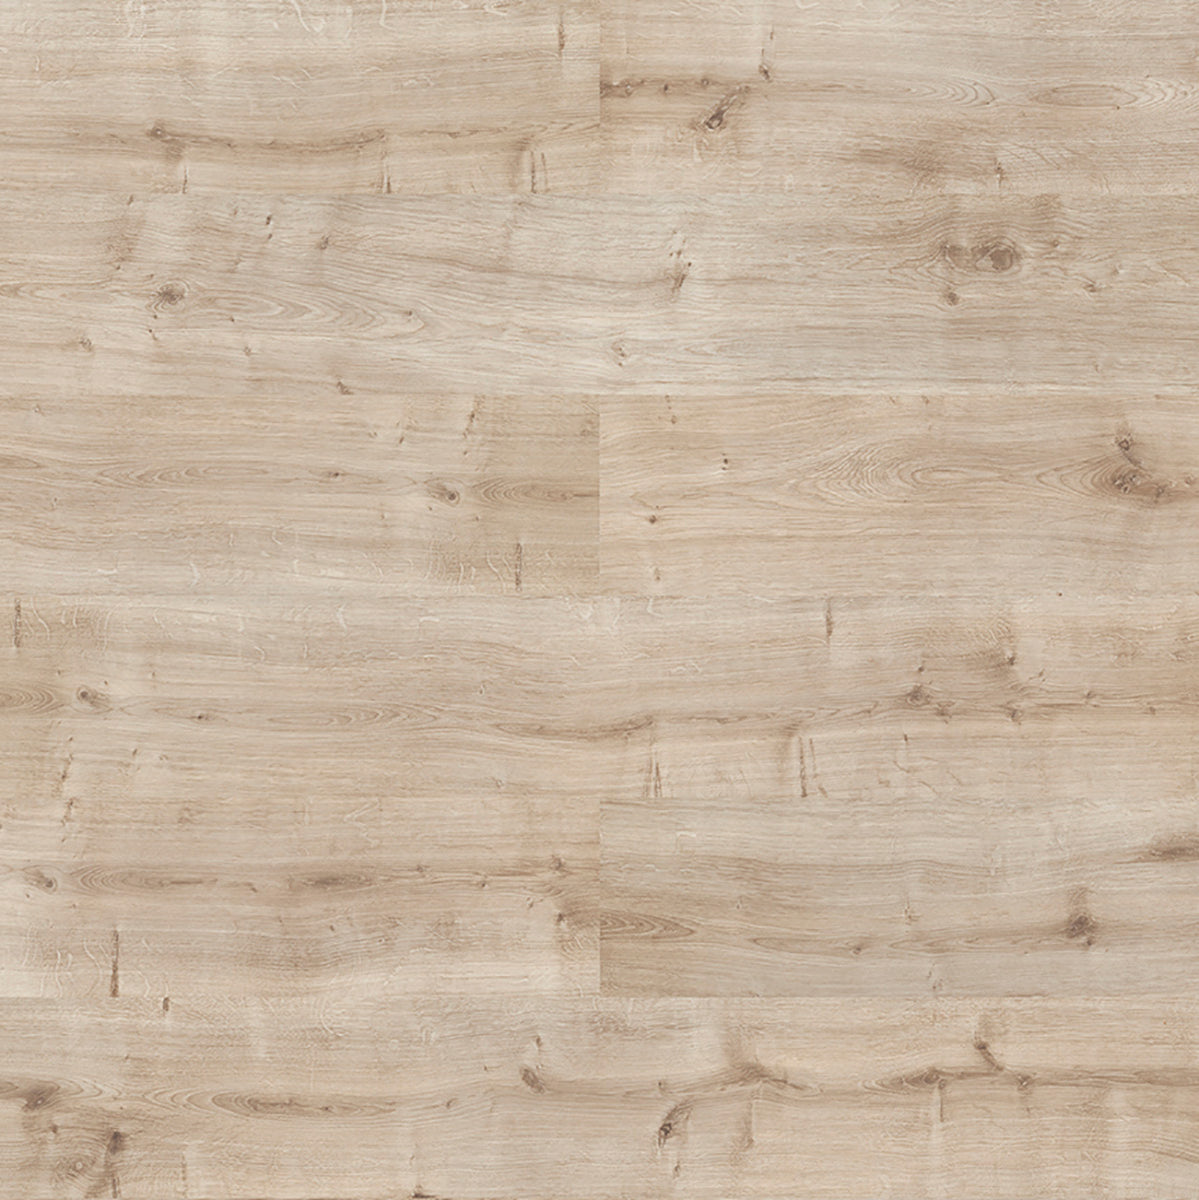 Inhaus - Solido Visions Collection - Natural Oak